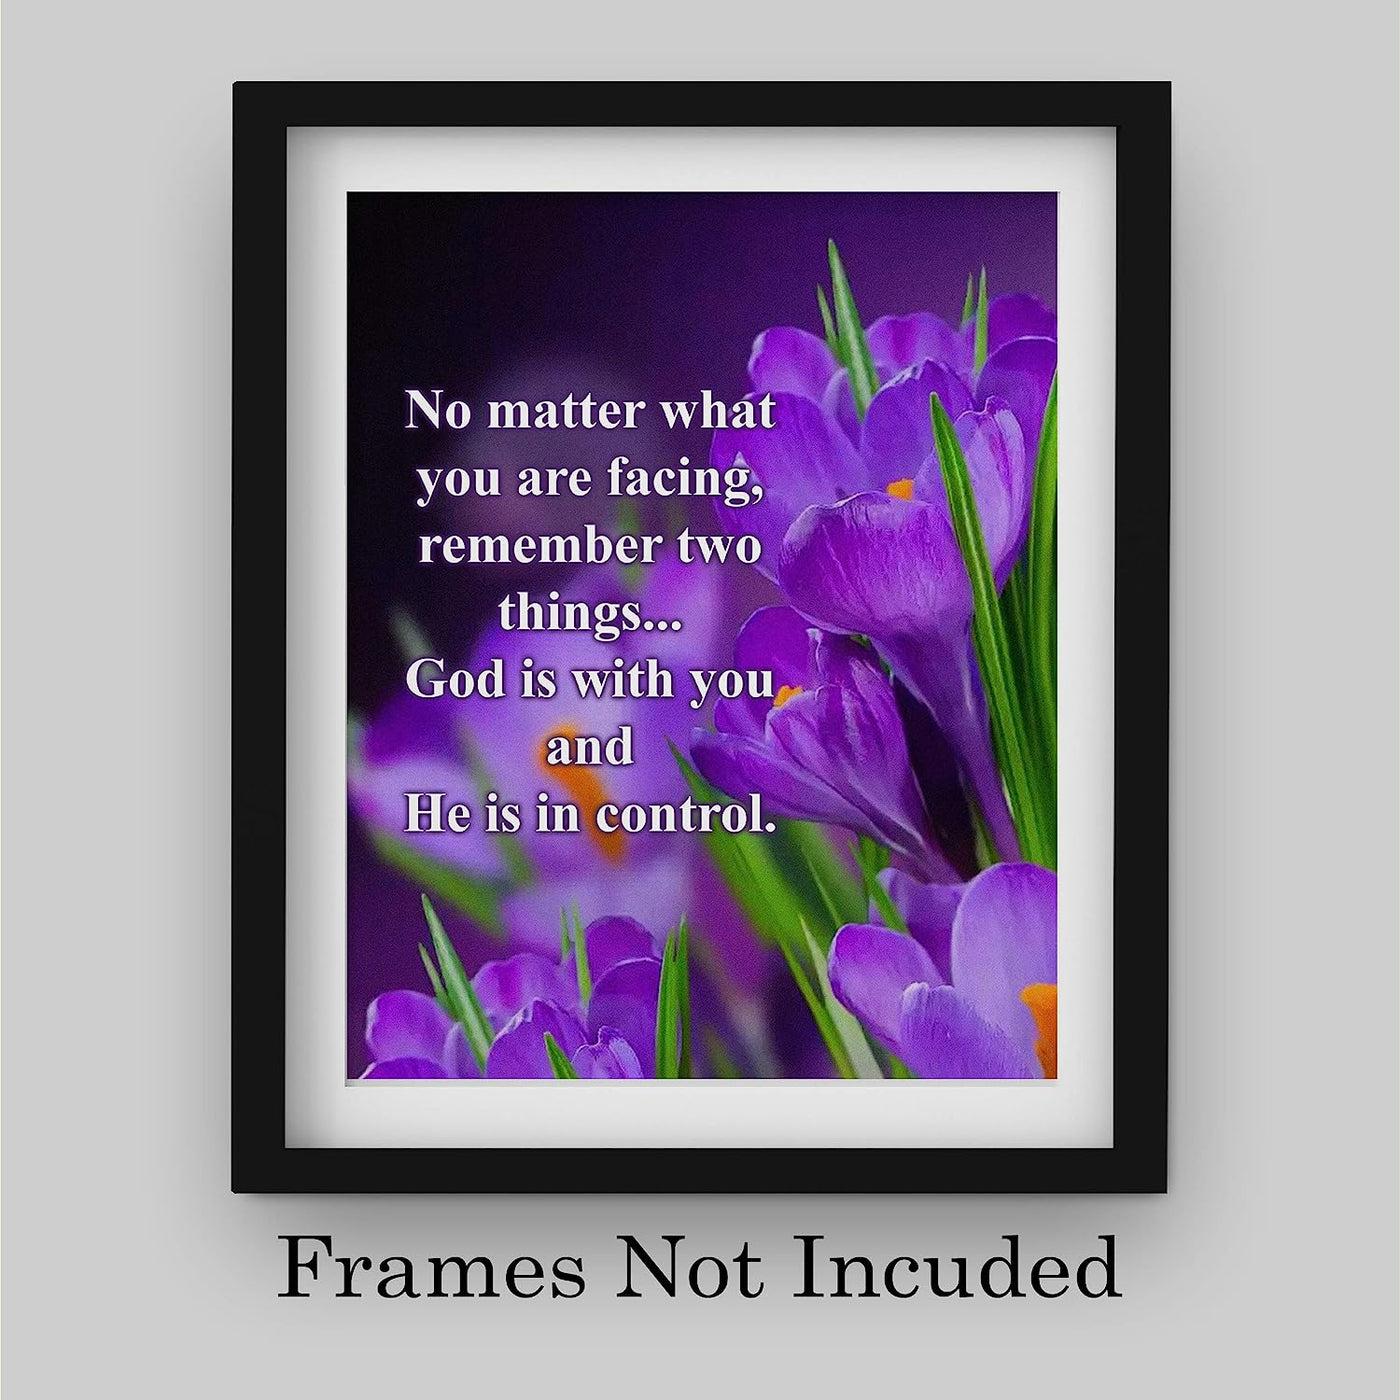 God Is With You-He Is in Control Inspirational Quotes Wall Art-8x10" Floral Christian Poster Print-Ready to Frame. Modern Typographic Design. Positive Home-Office-Church Decor. Great Gift of Faith!